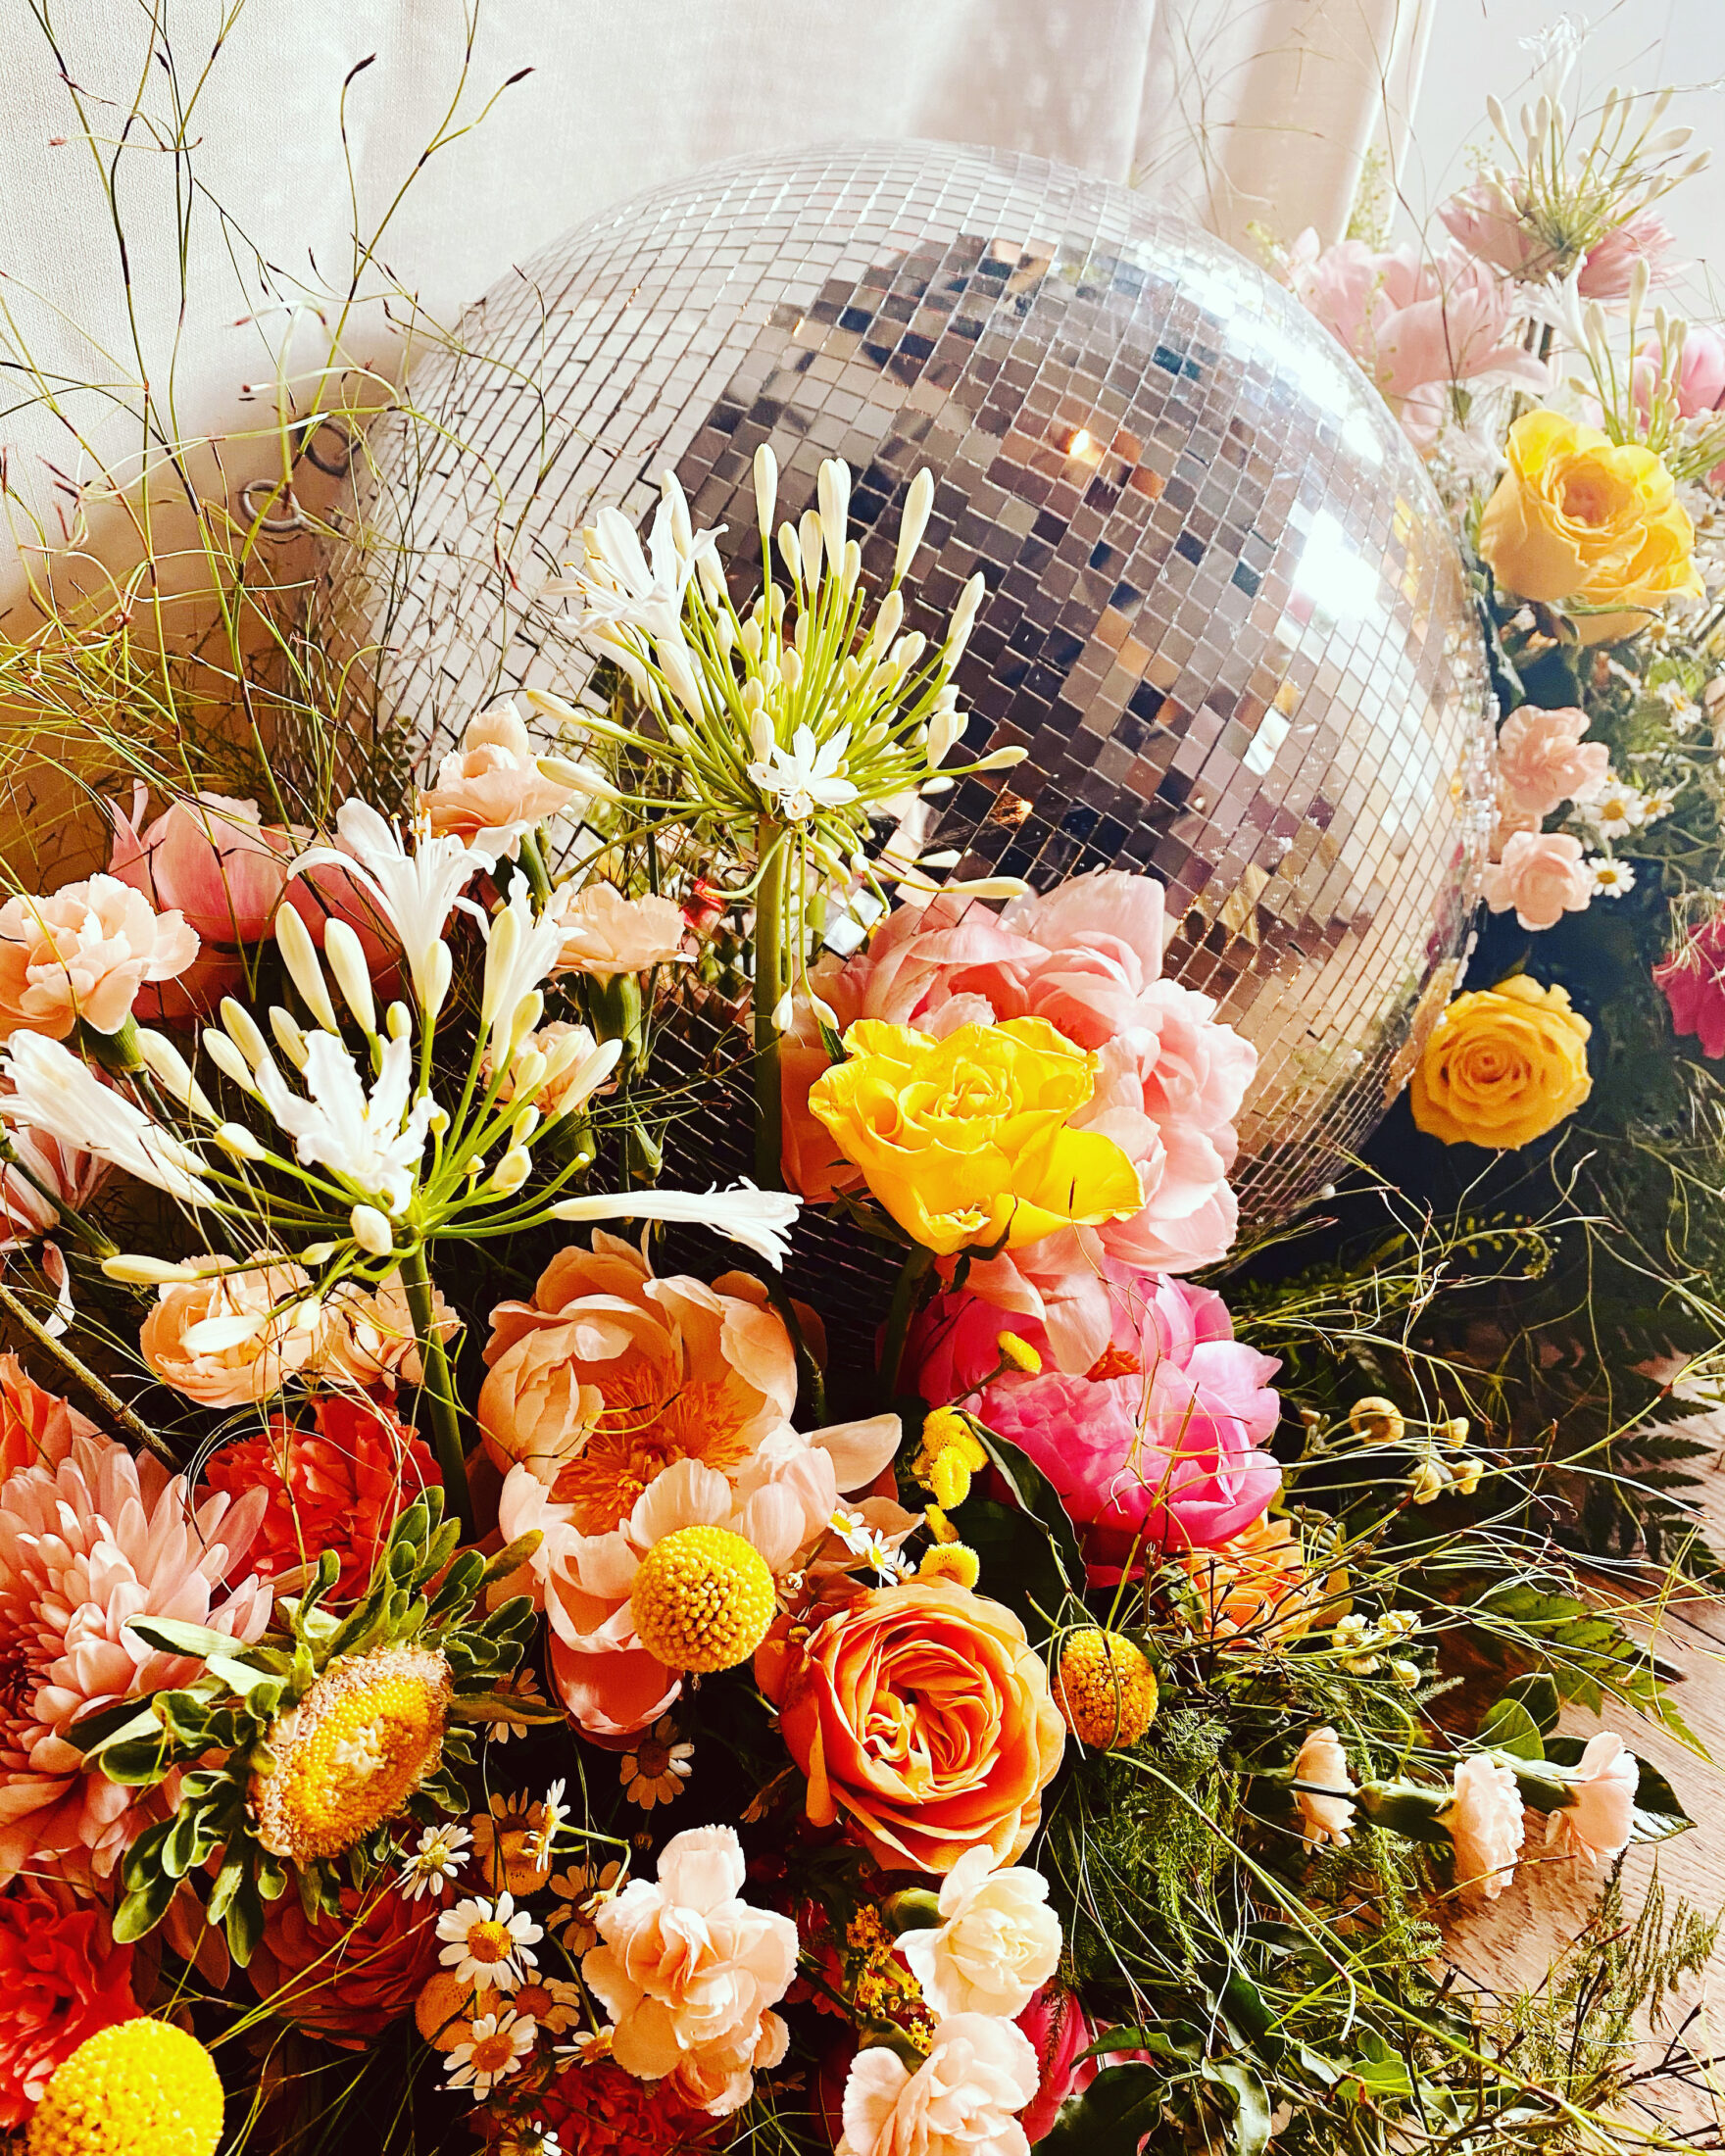 disco ball and floral